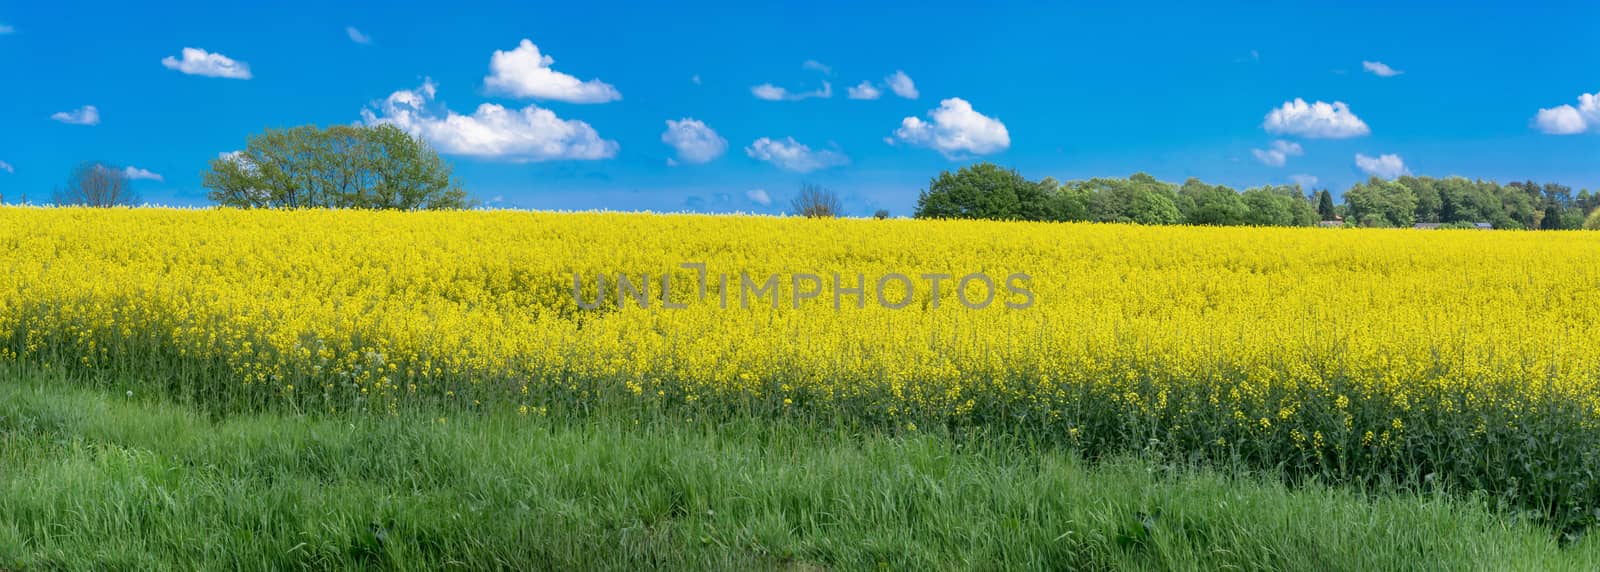 Blooming rapeseed field panorama by JFsPic